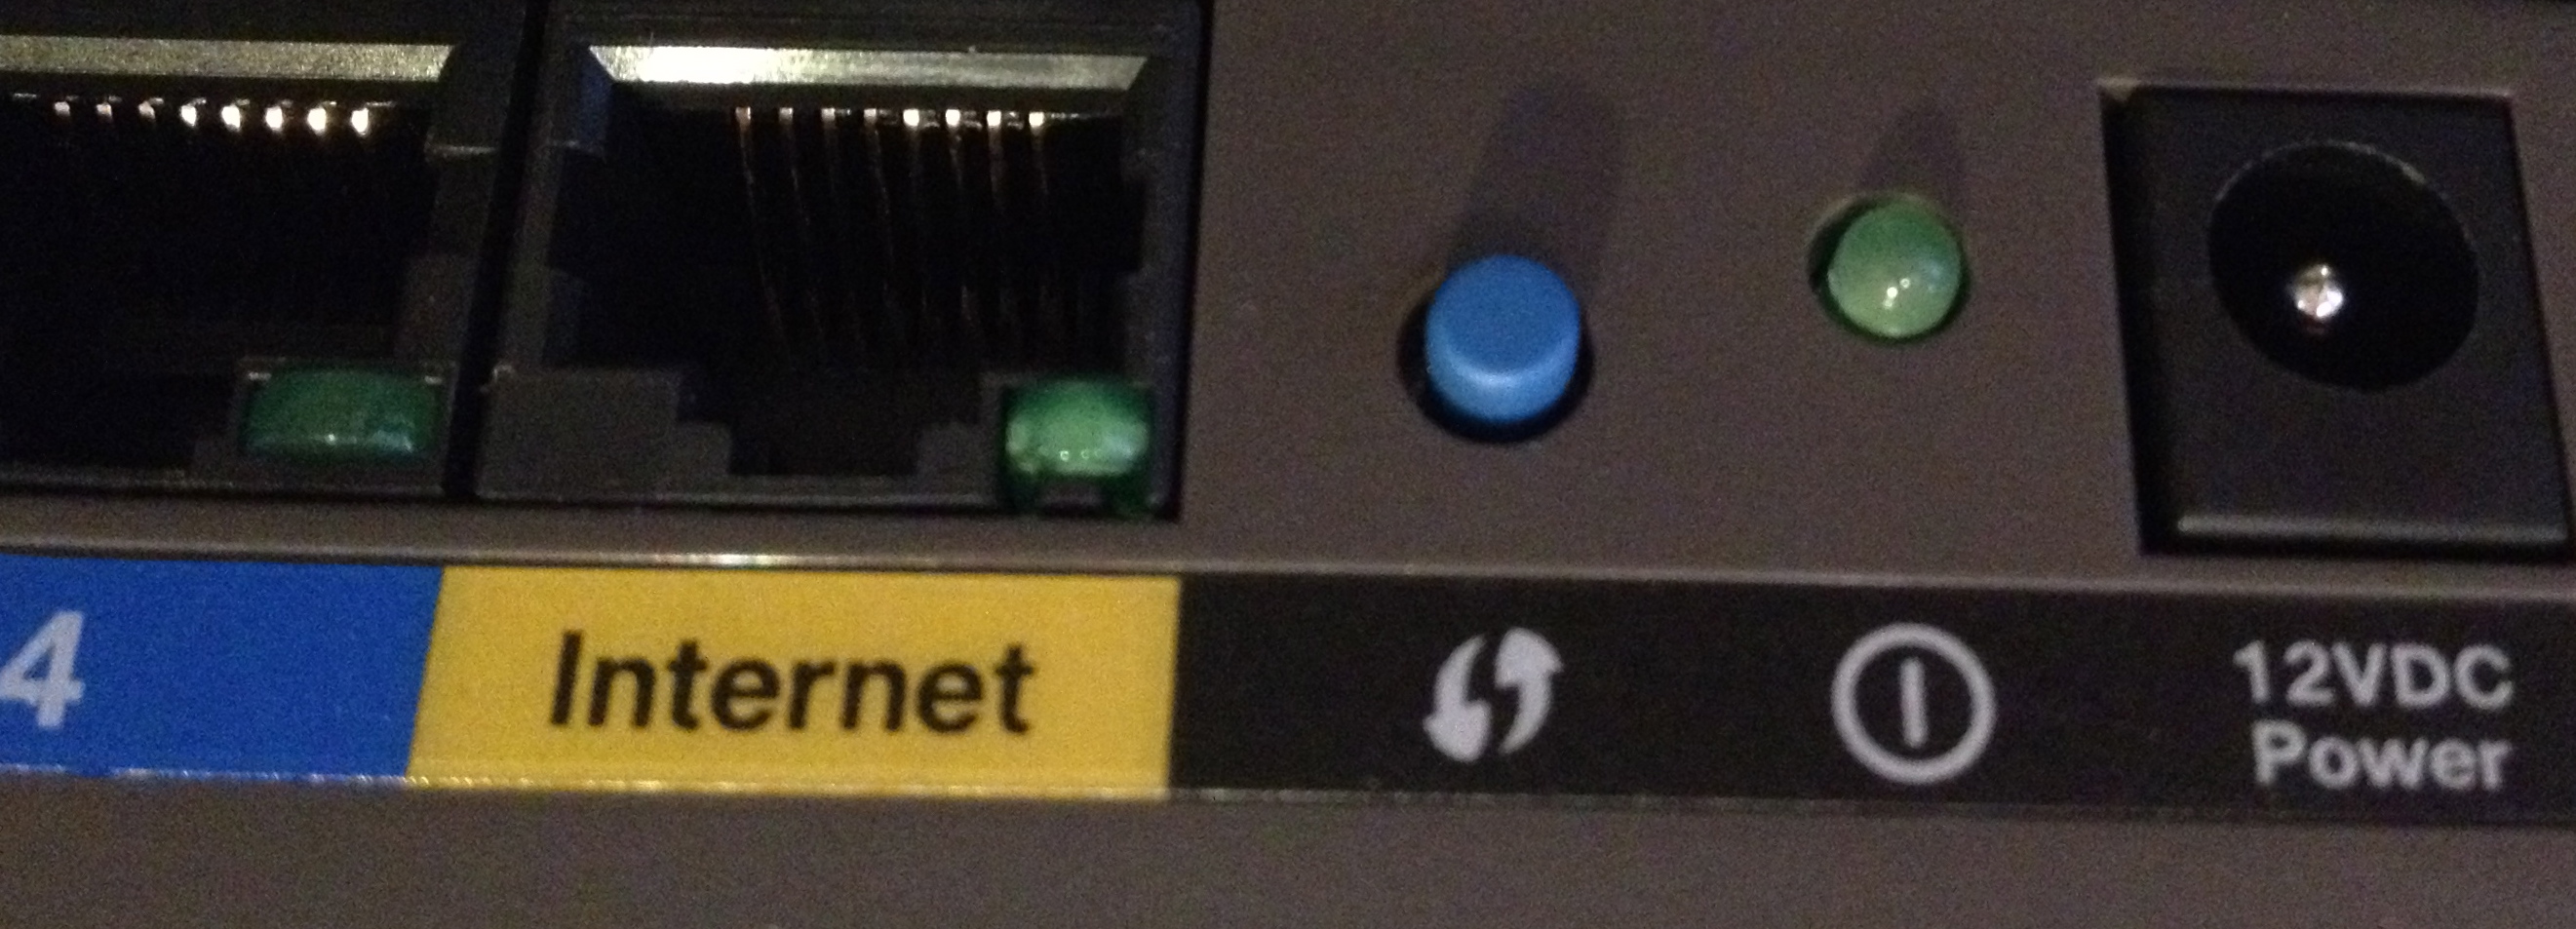 Power button on a modem or router